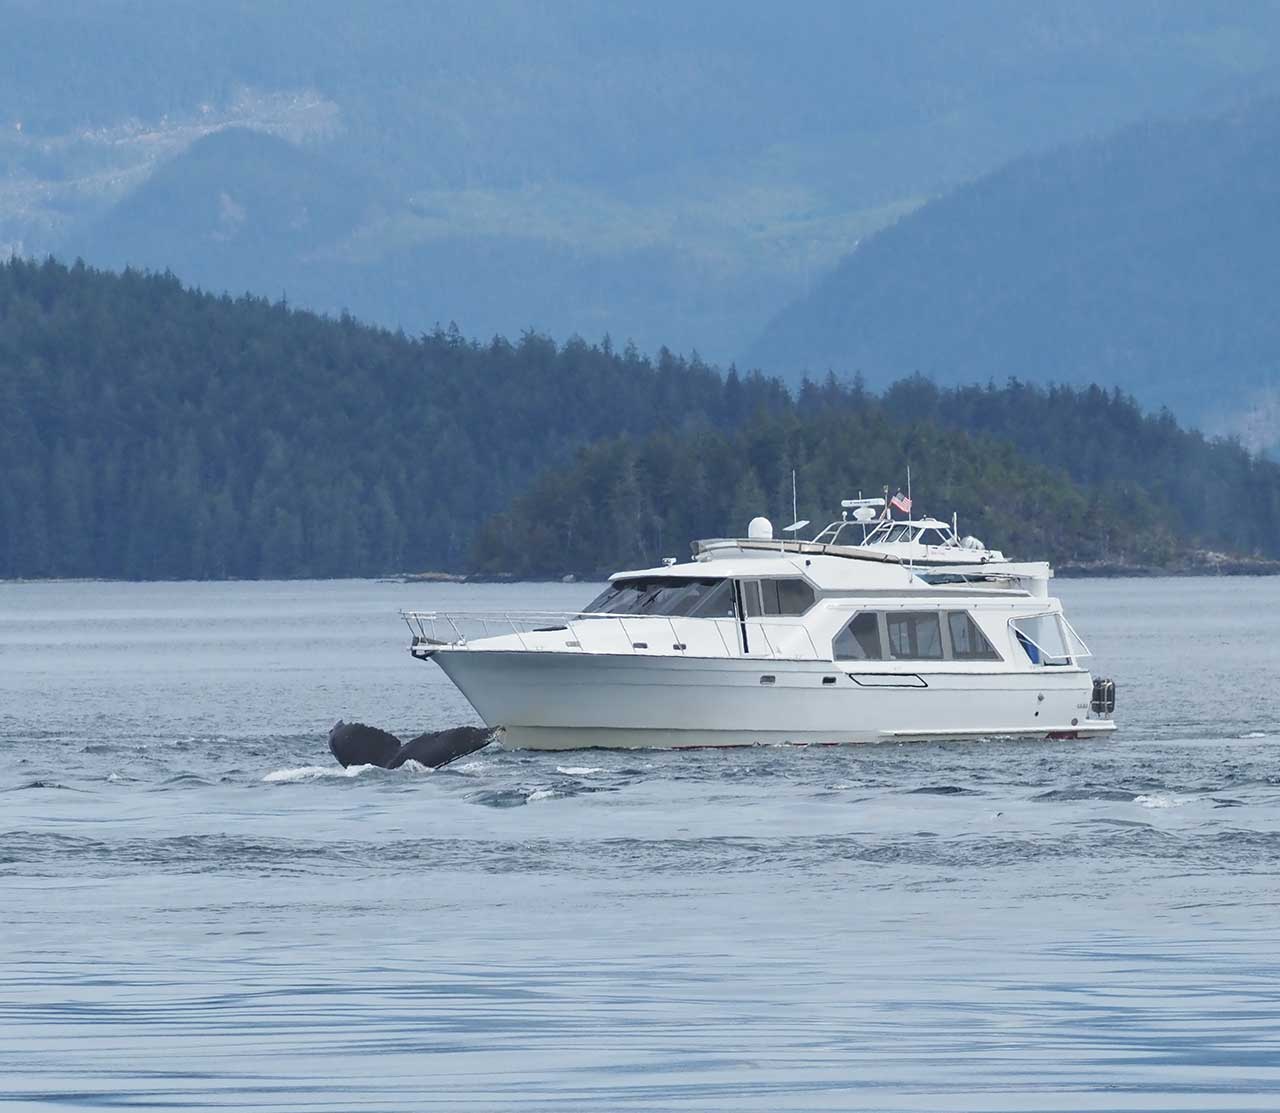 mers marine education research society boat too close to whale